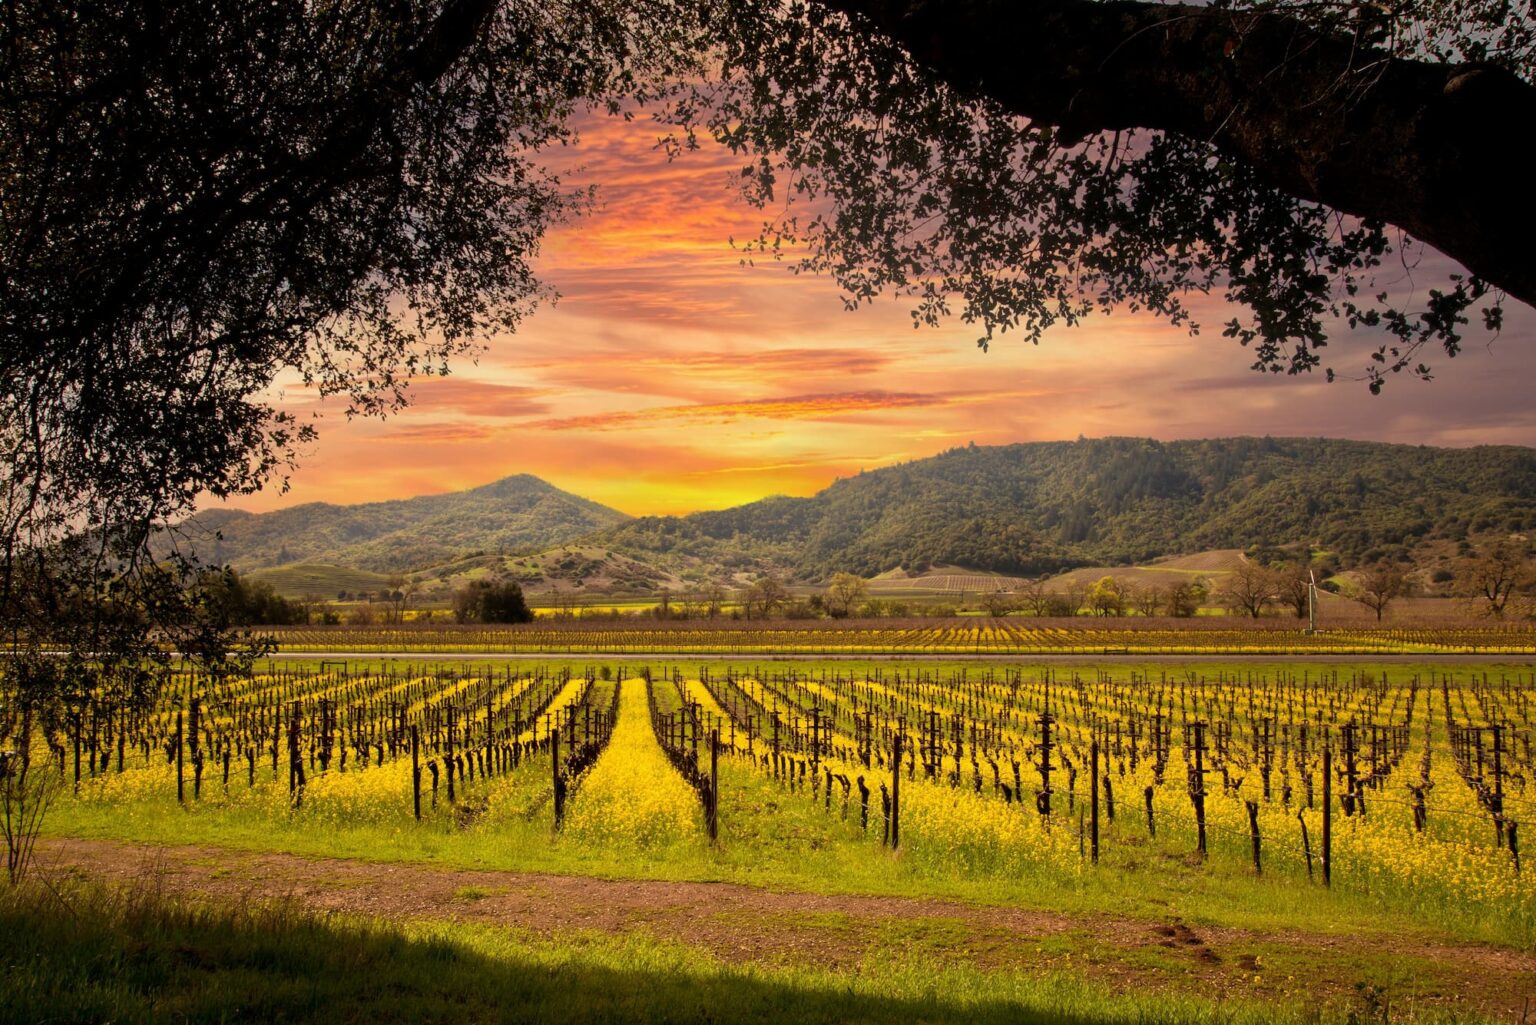 Napa-Valley-Vineyards-and-Mustard-in-Spring-and-Beautiful-Sunset-Sky.jpg